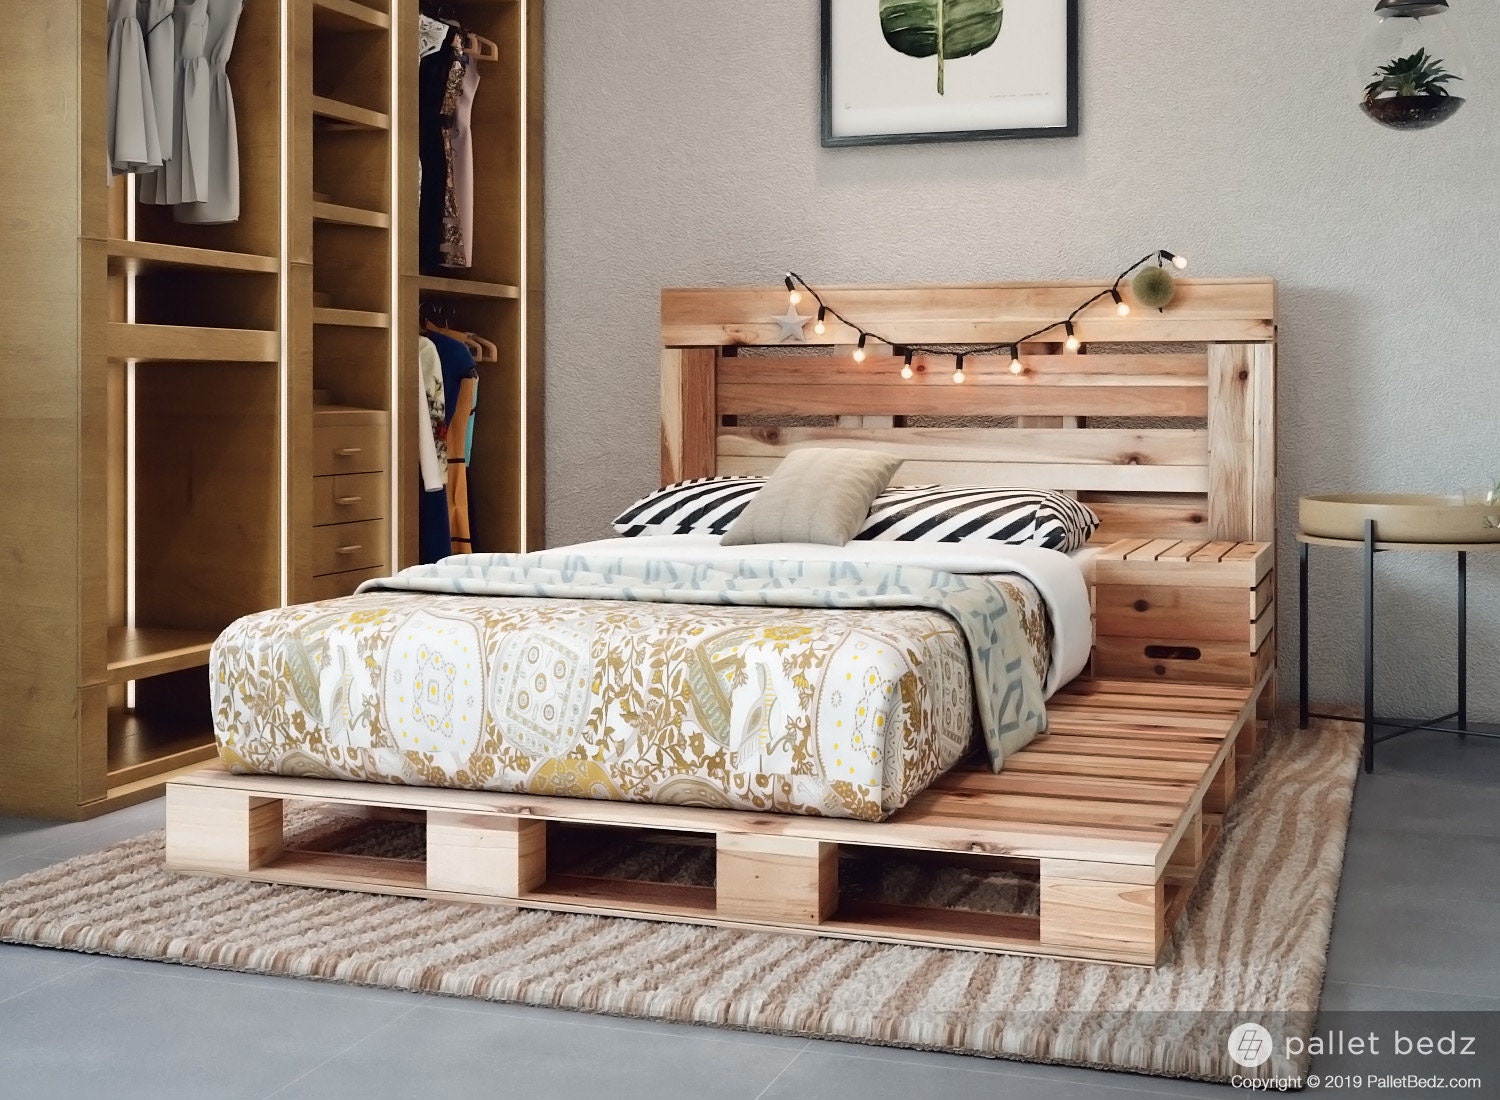 Pallet Bed The Twin Size Includes, Twin Bed Frame Out Of Pallets